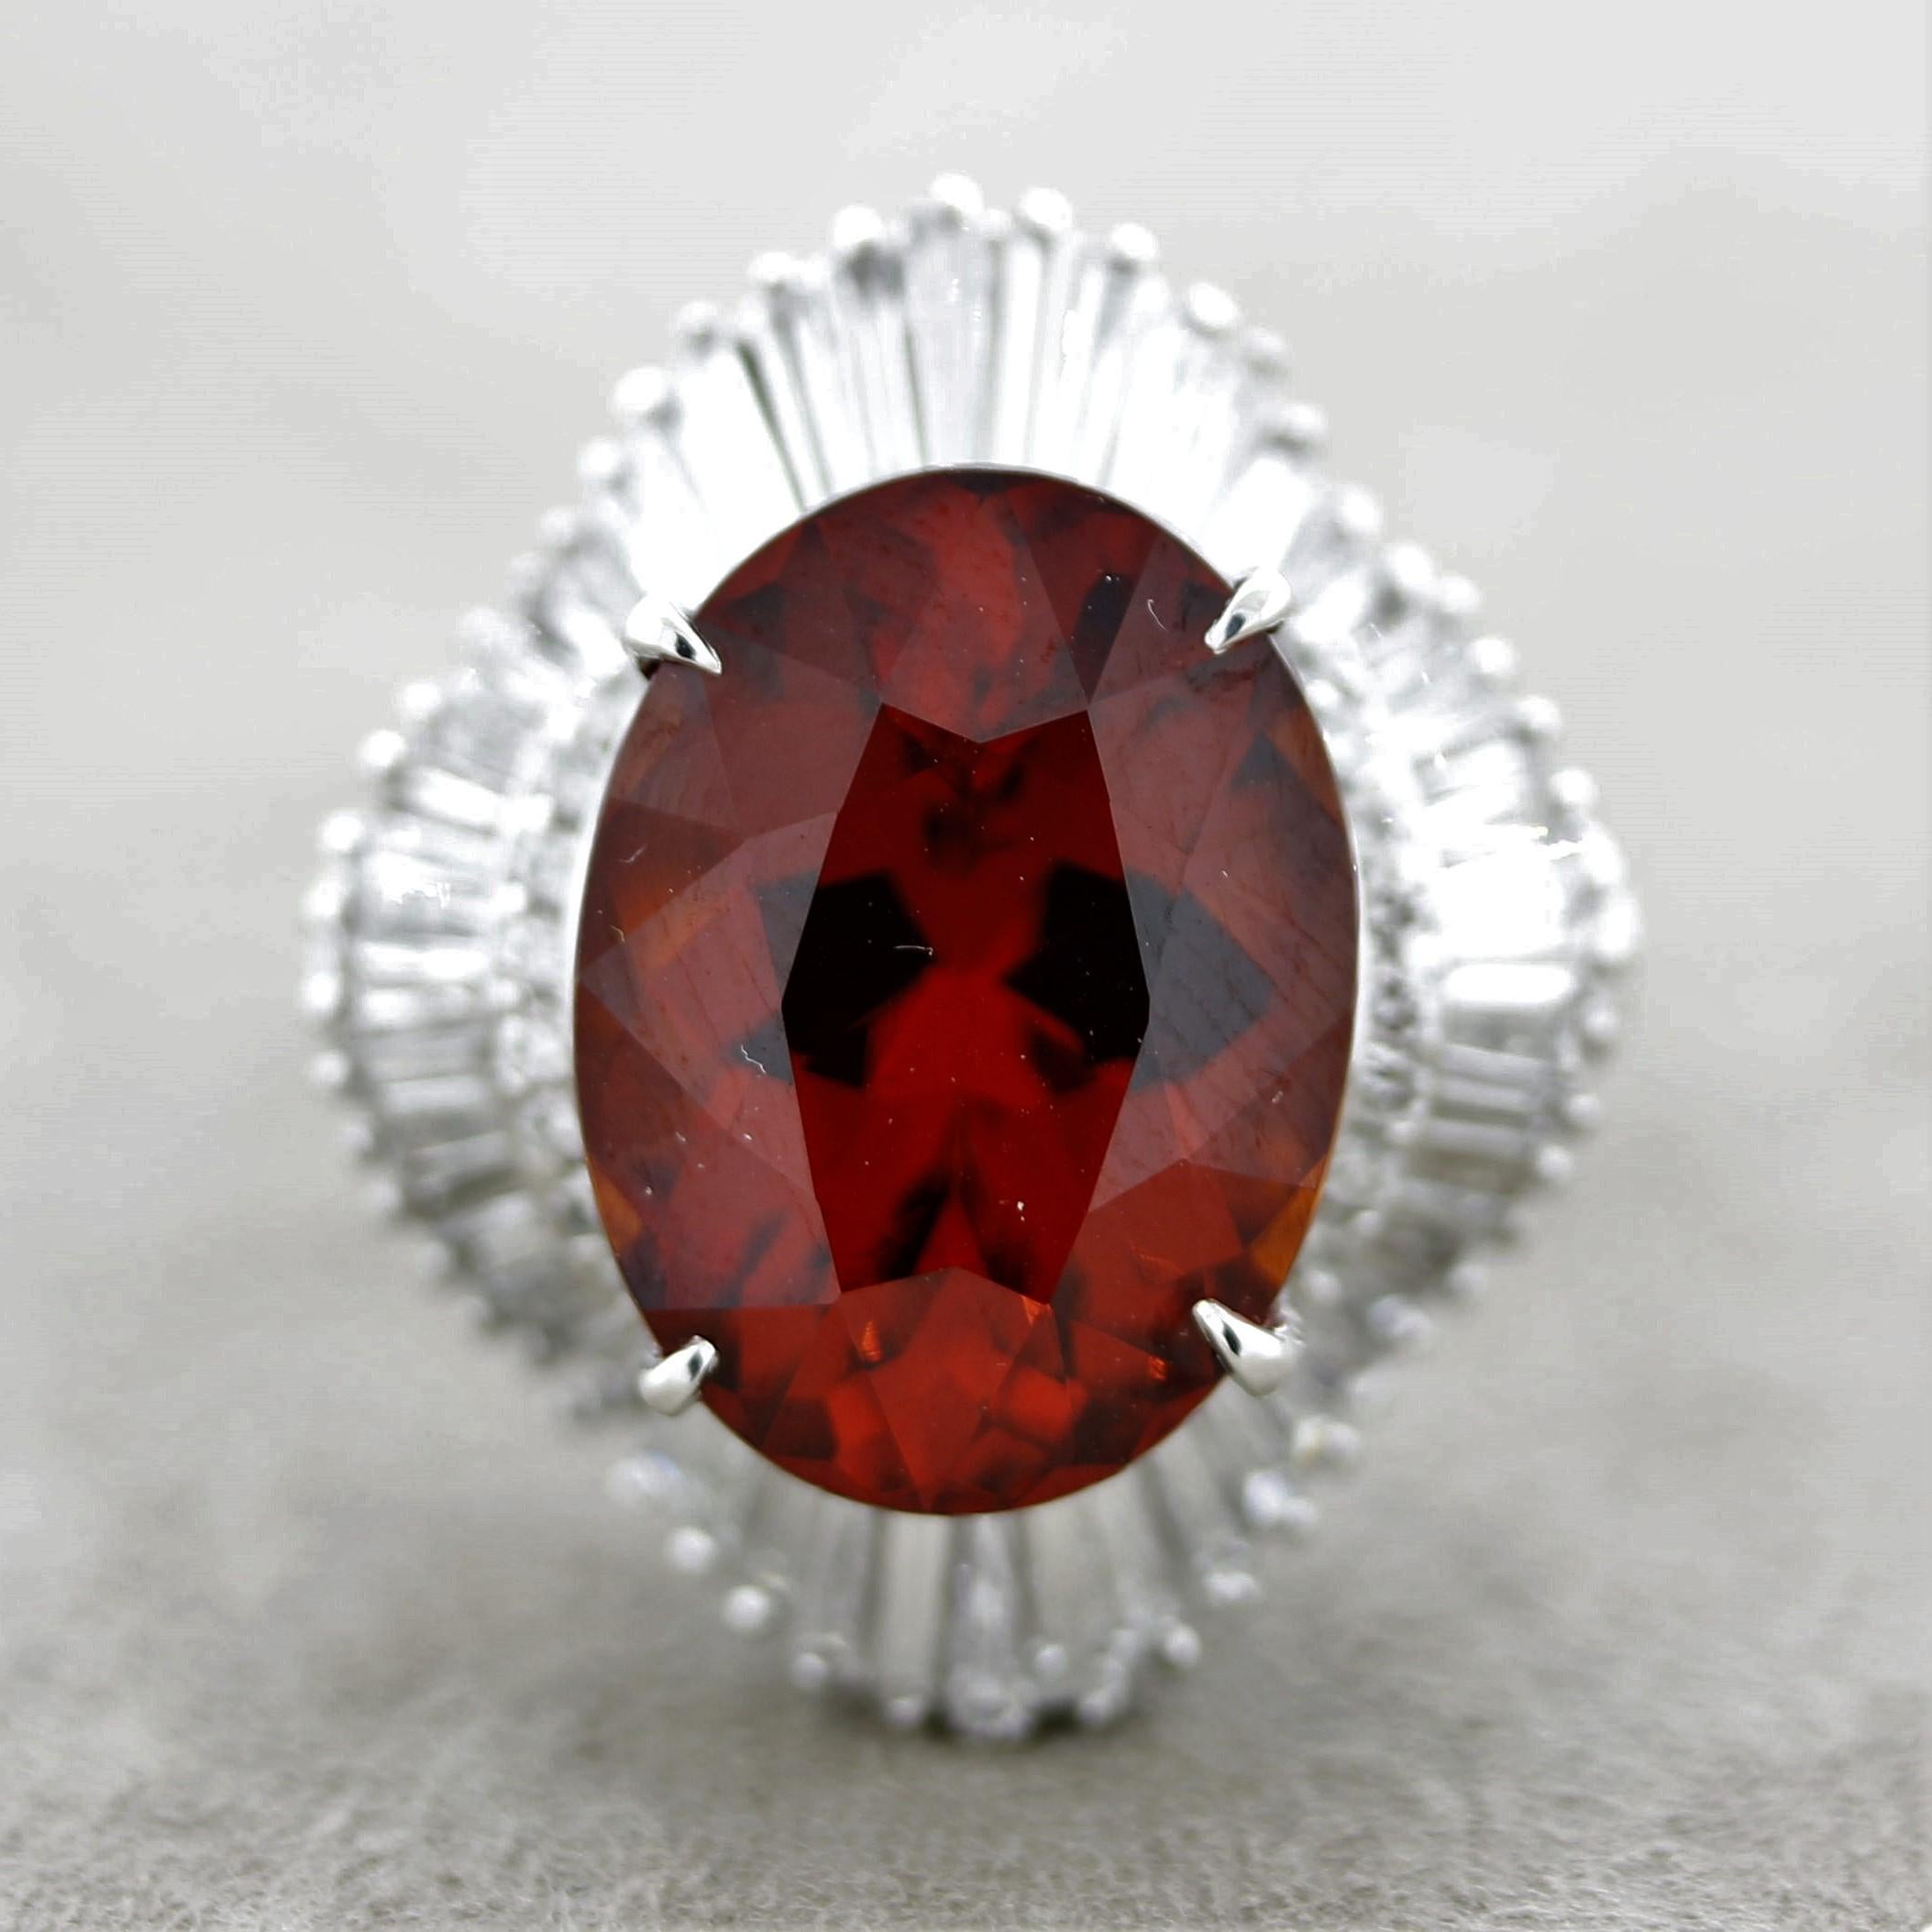 A special spessartine garnet with a bright vivid orange color giving it the trade name “mandarin” garnet. It weighs an impressive 13.60 carats and has an excellent oval-shape with plenty of brilliance and light return. It is complemented by 1.71